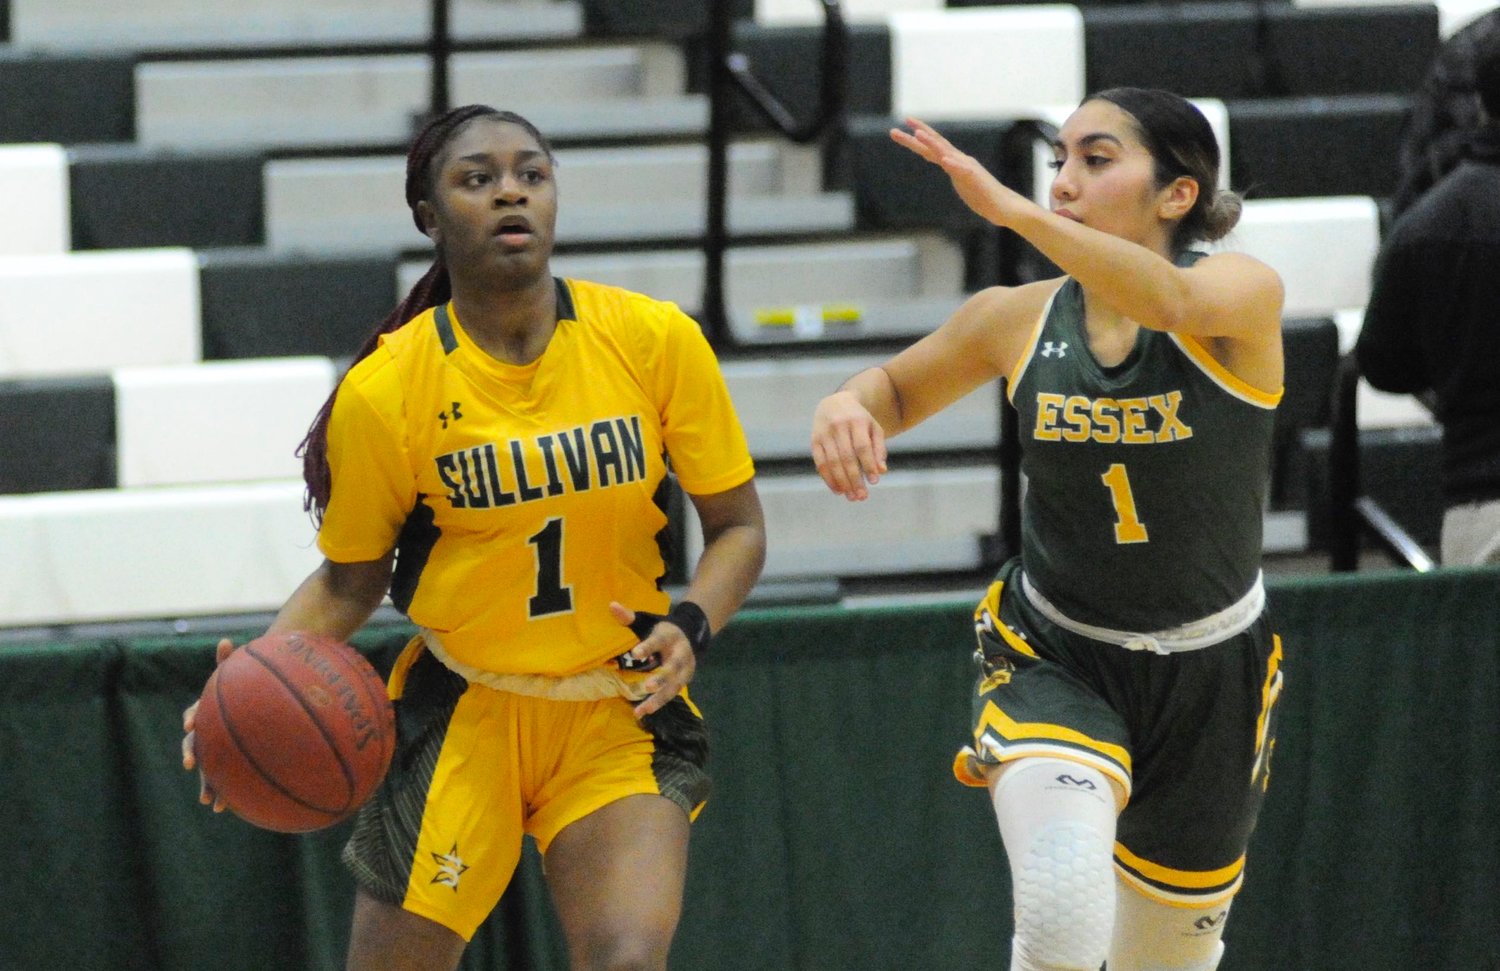 Keyani Sidberry, a sophomore guard for the Lady Generals, aced a three-pointer. A graduate of Park East High School in the Bronx, she is pictured with Ania Martinez of the Lady Wolverines.